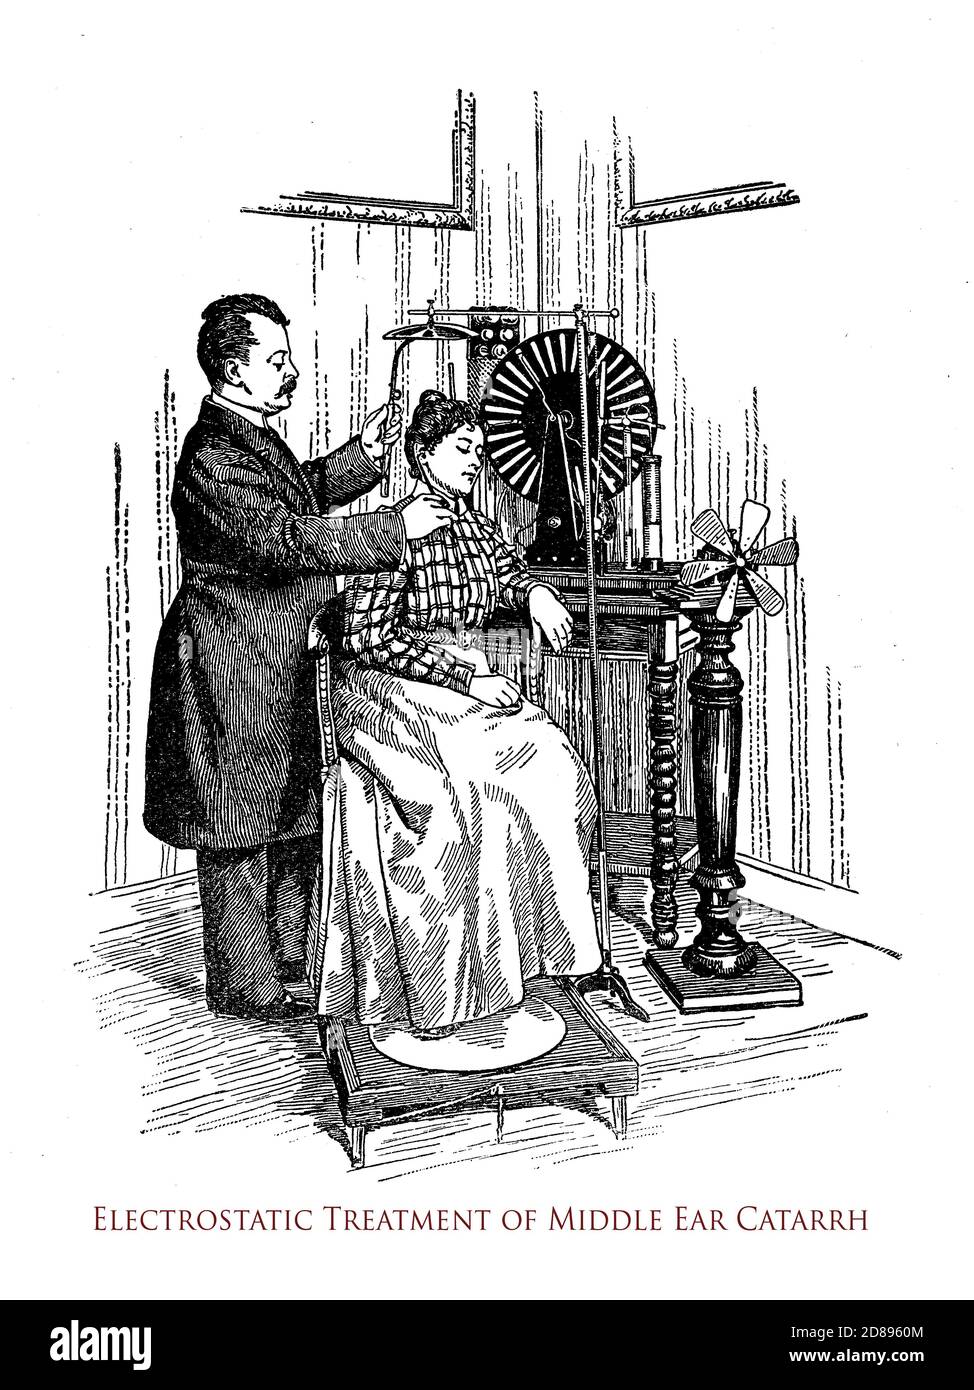 Alternative medicine, cure with electricity: electrotherapeutic  treatment, vintage illustration Stock Photo